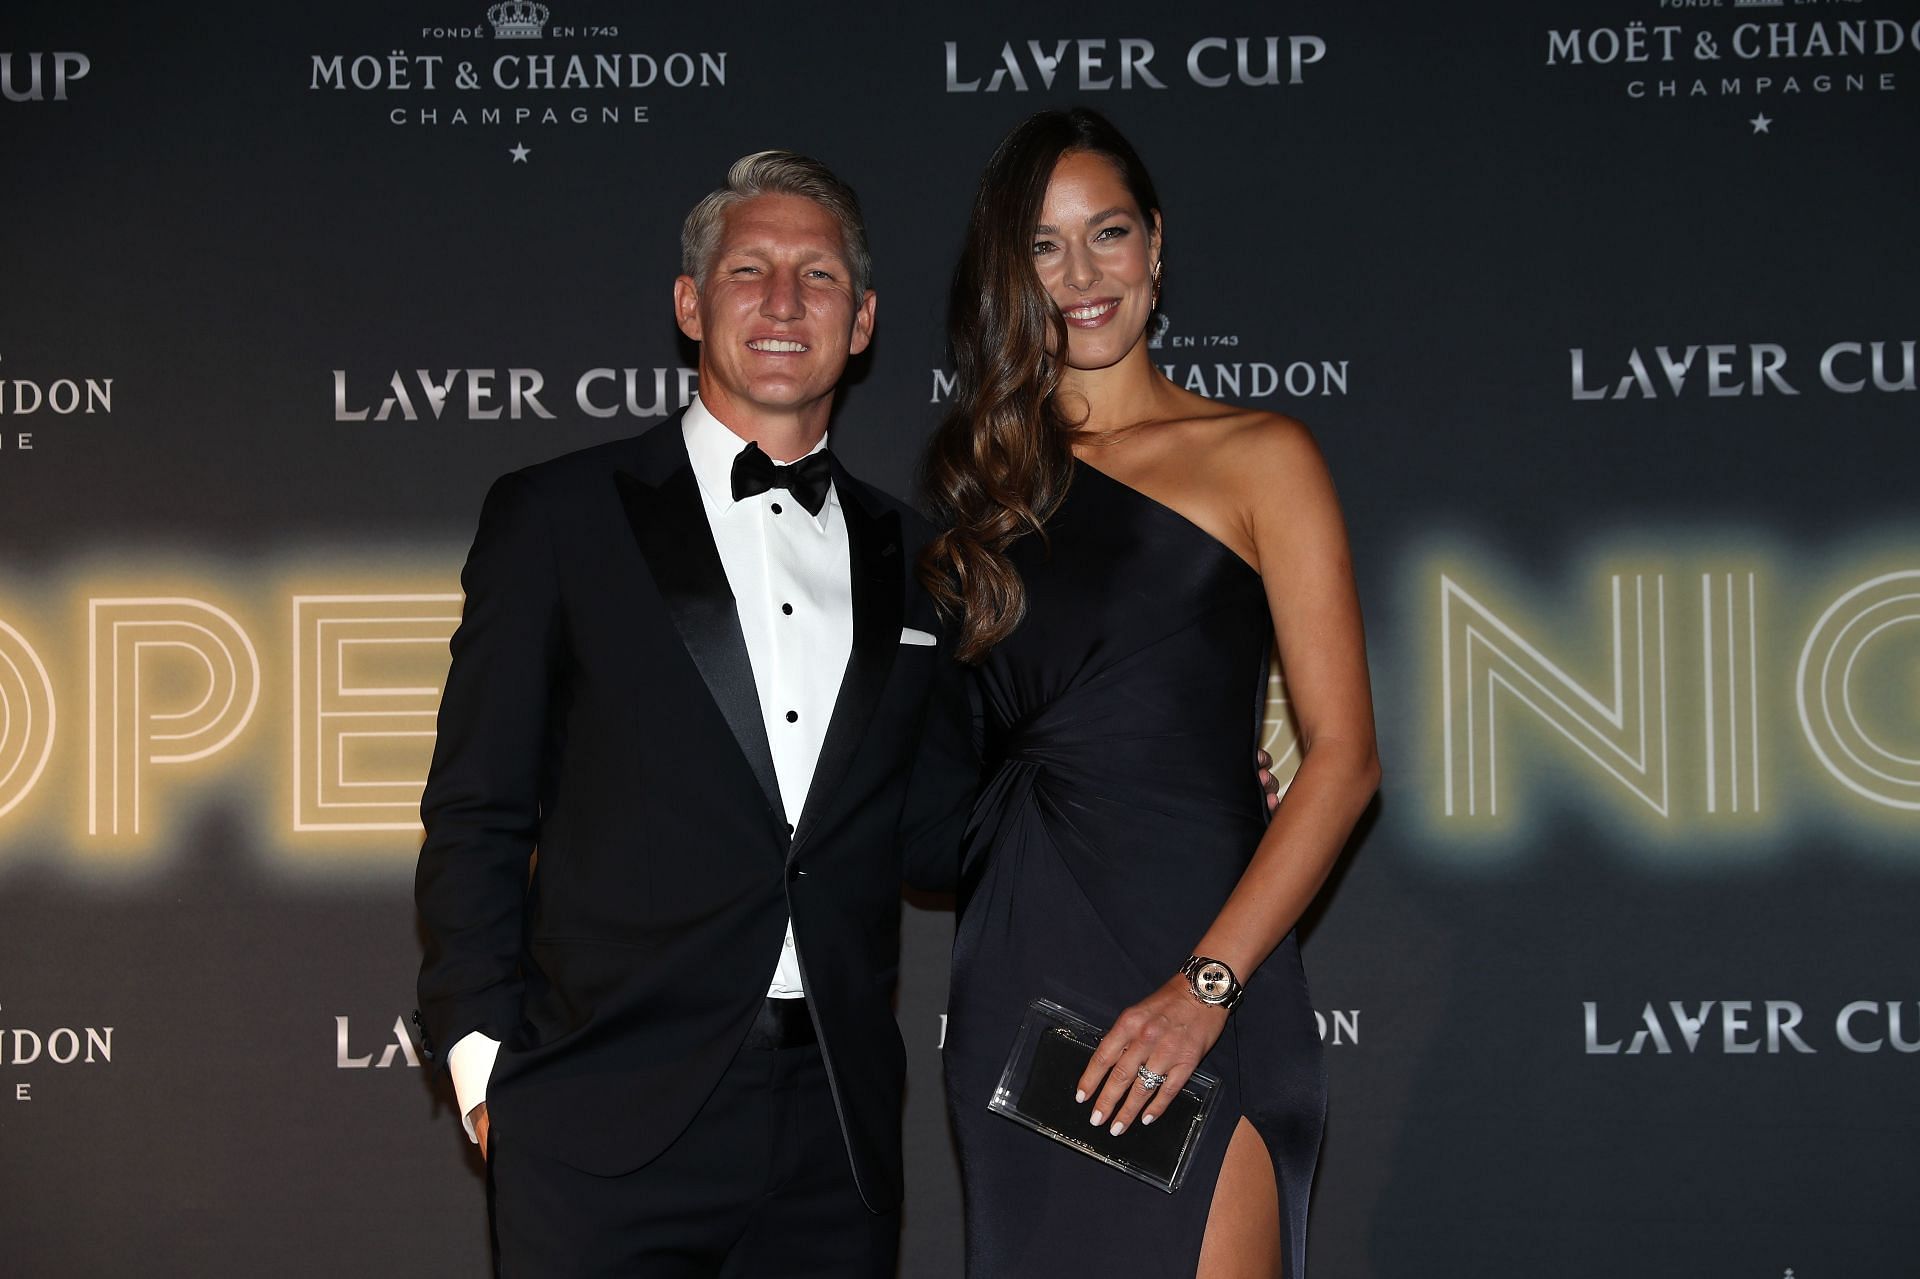 Ana Ivanovic pictured with her husband Bastian Schweinsteiger at the Laver Cup Opening Night.